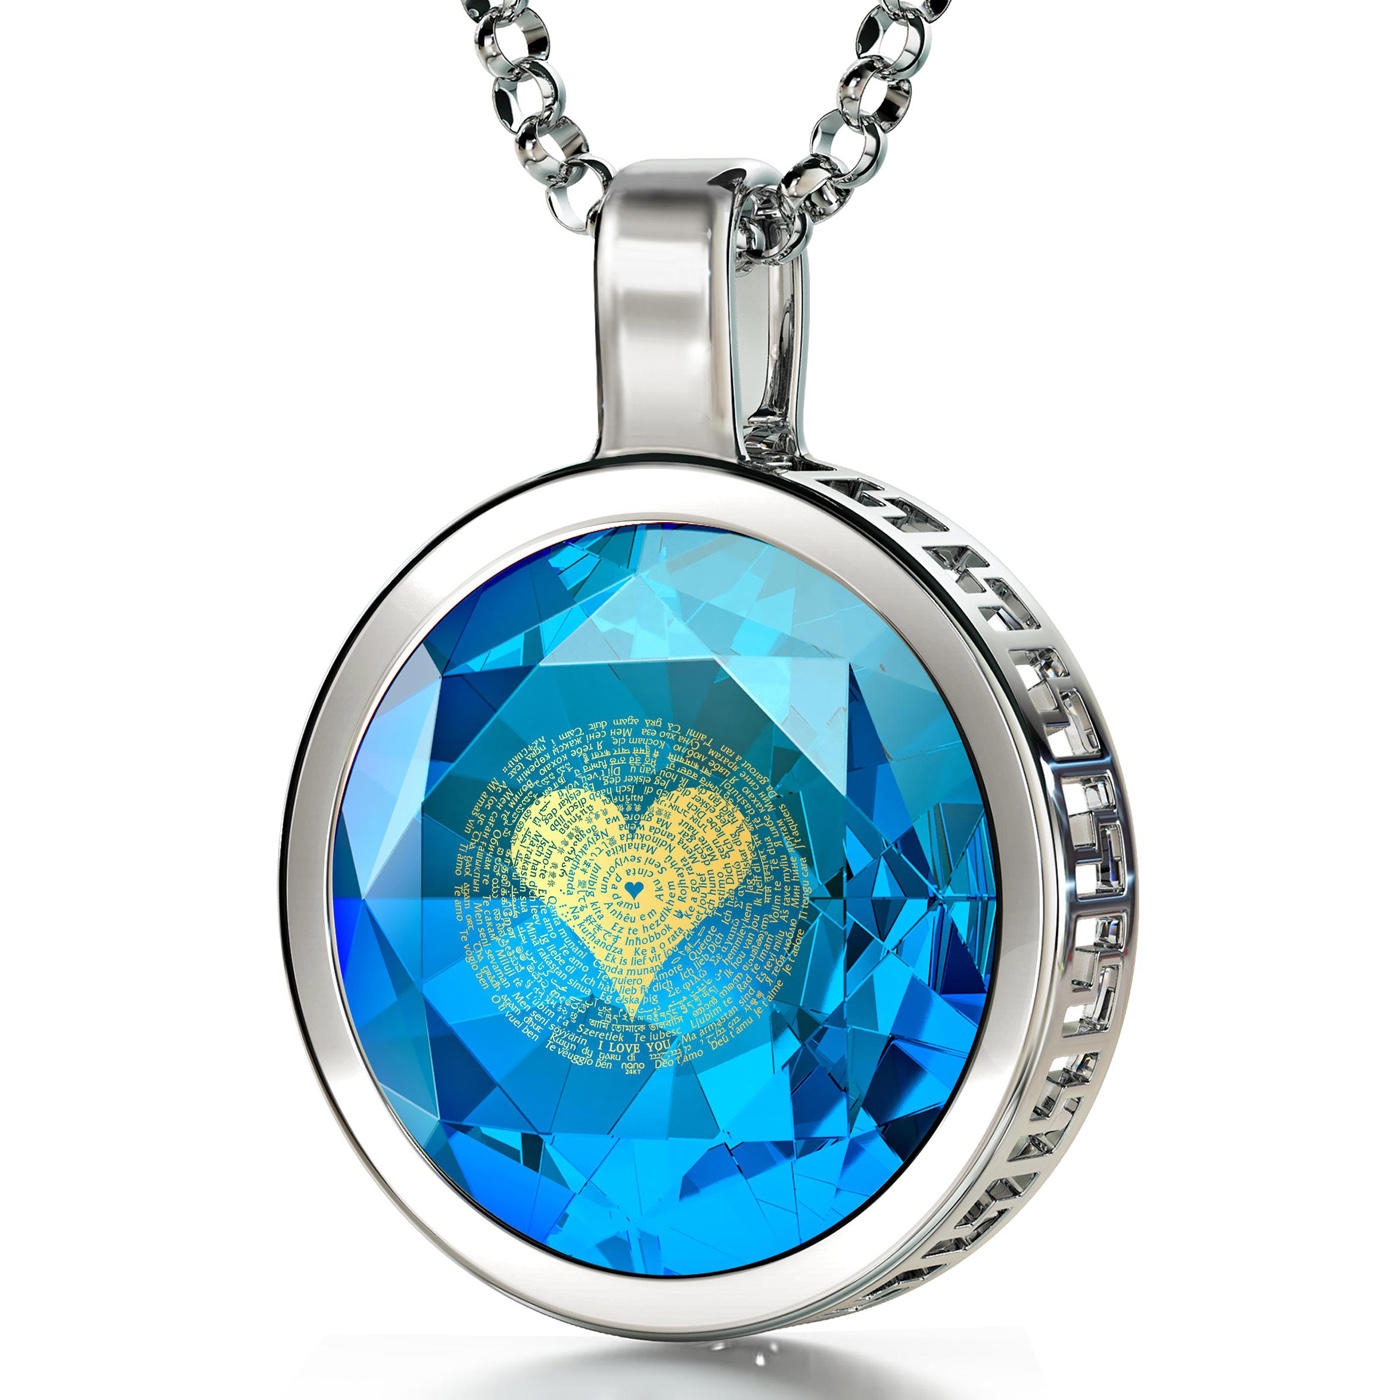 Sterling Silver and Large Cubic Zirconia Necklace Micro-Inscribed with 24K Gold Heart and "I Love You" in 120 Languages - 1